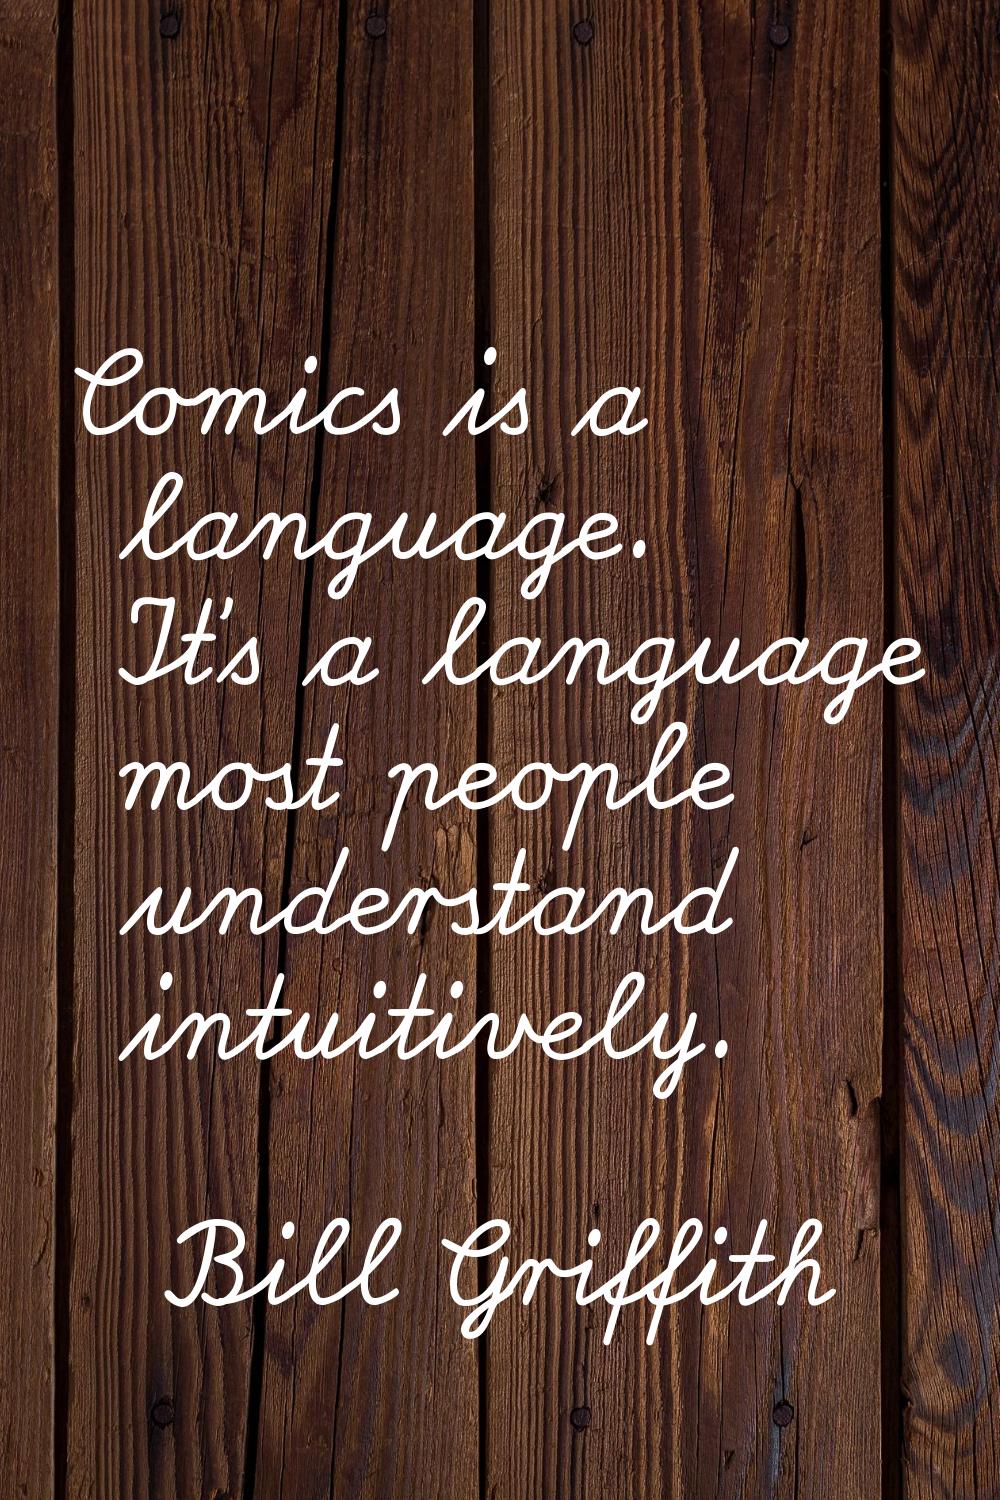 Comics is a language. It's a language most people understand intuitively.